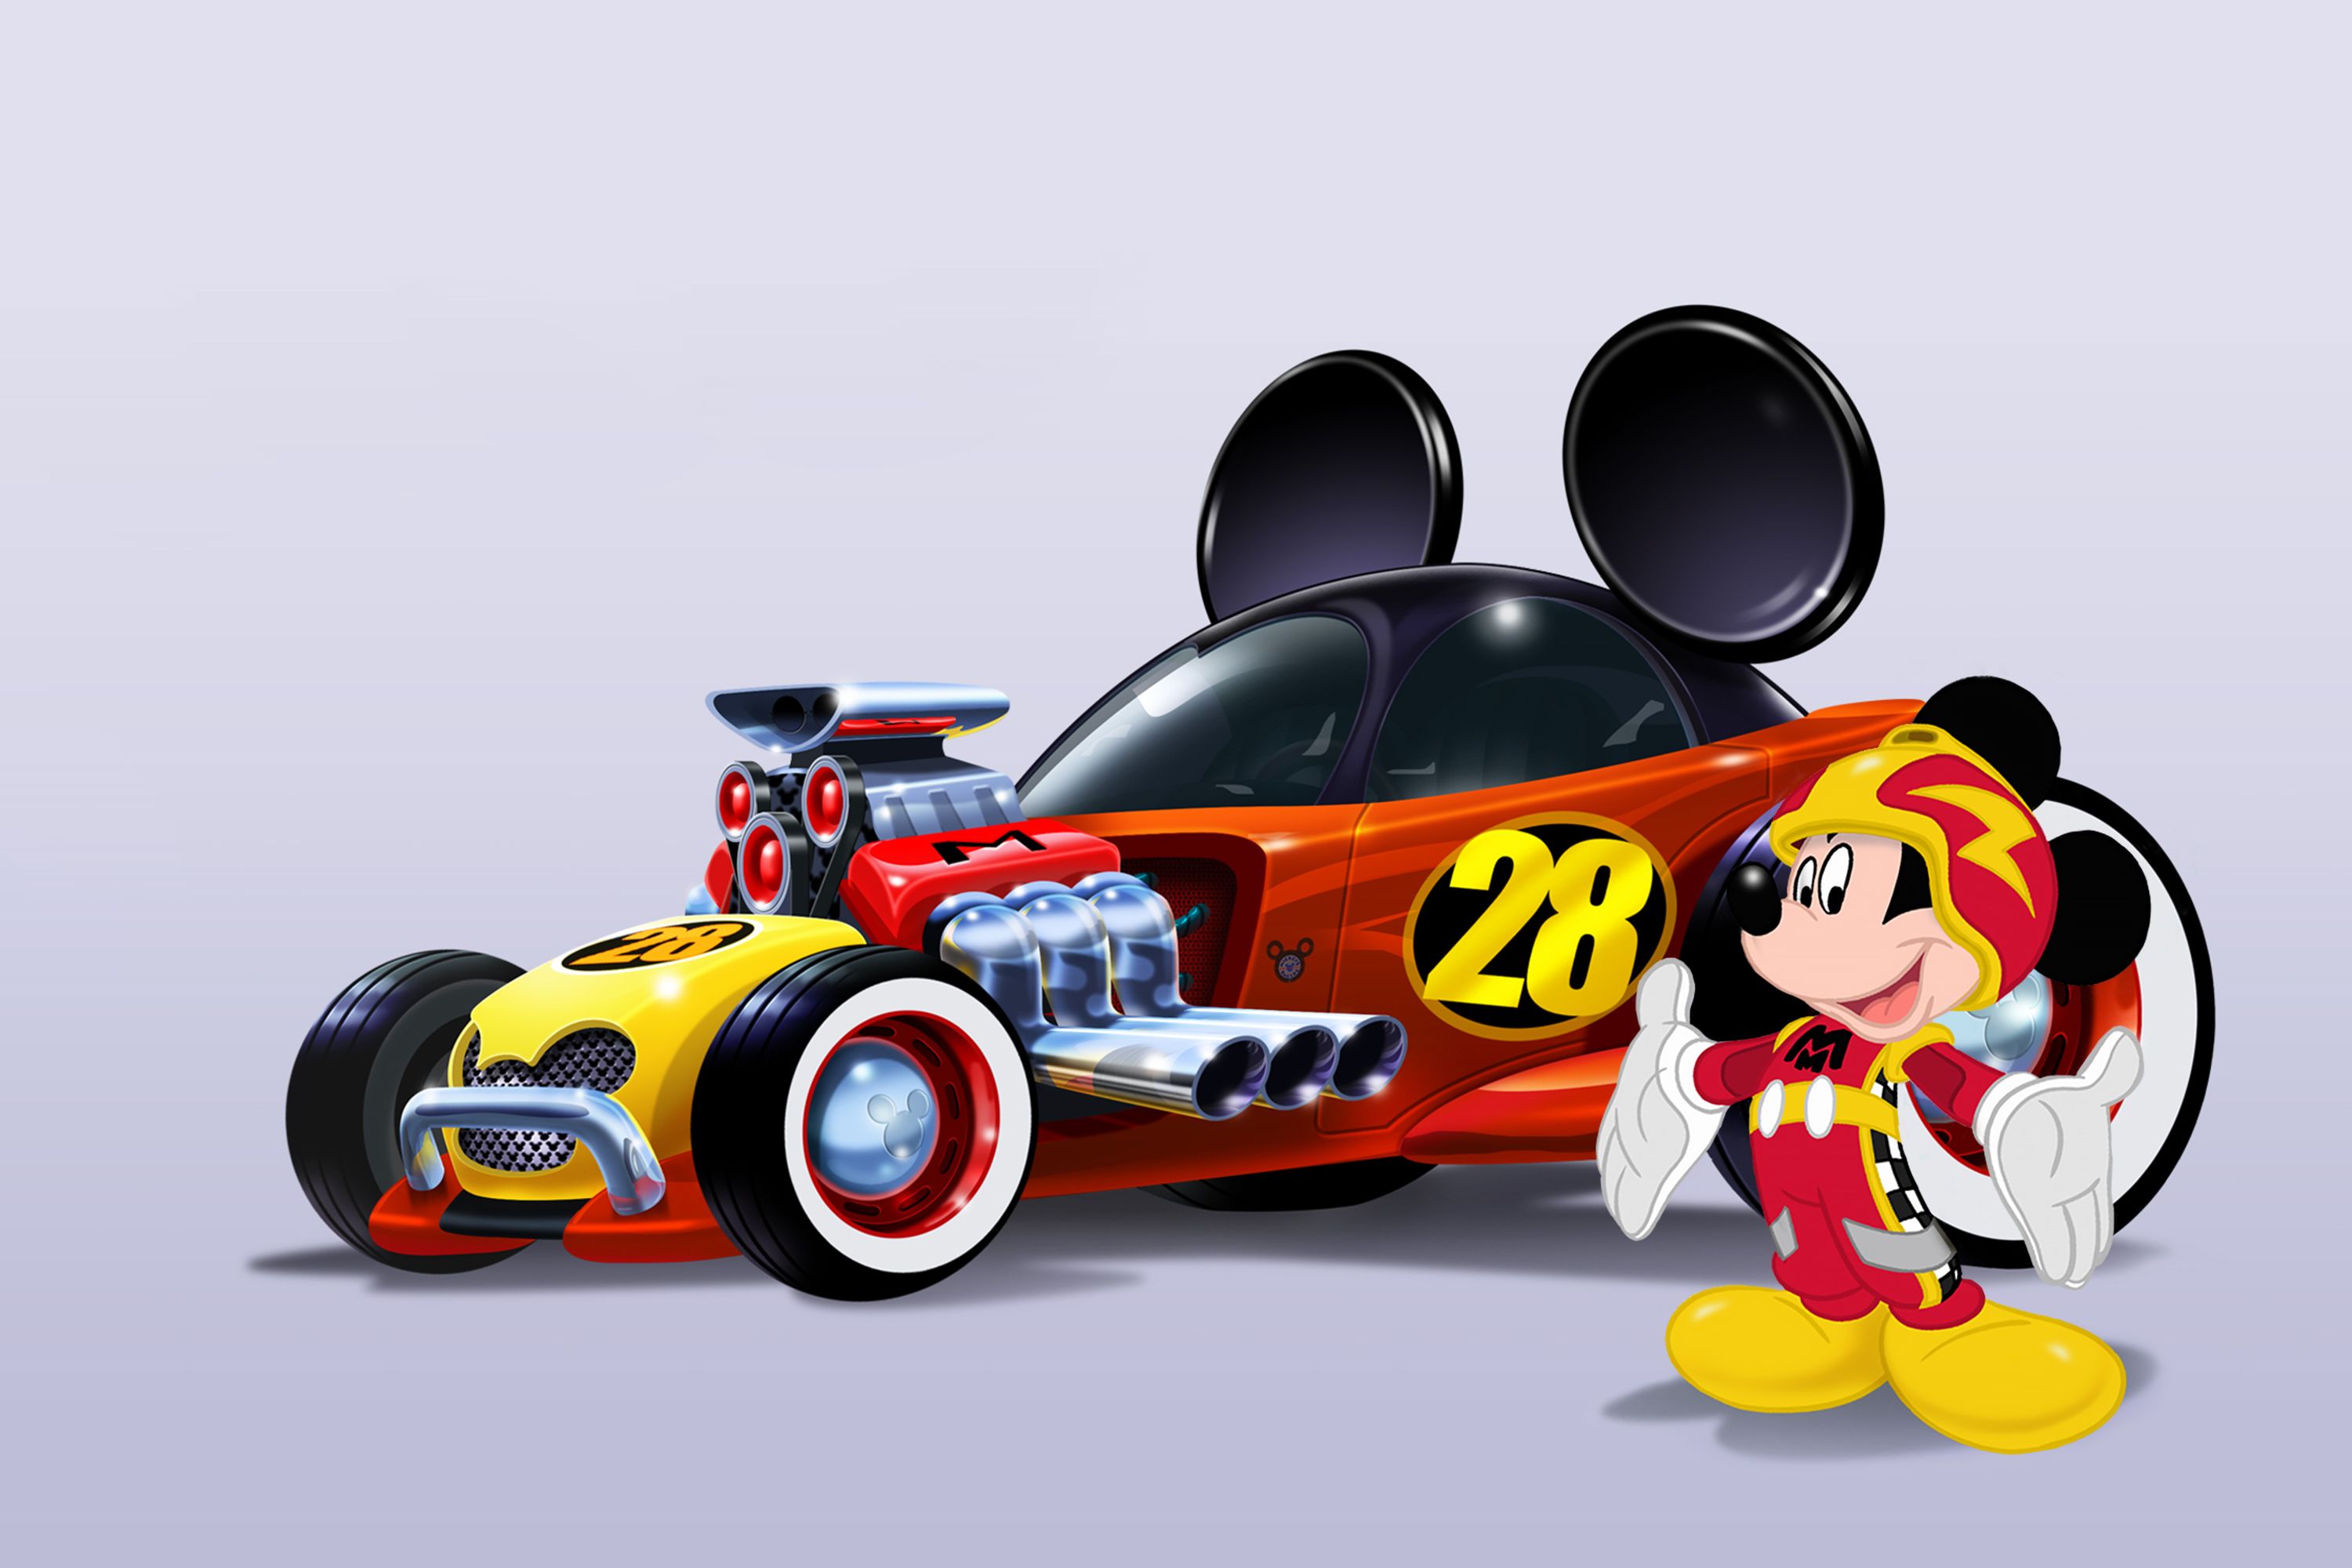 WATCH 'Mickey and the Roadster Racers' Coming in 2017